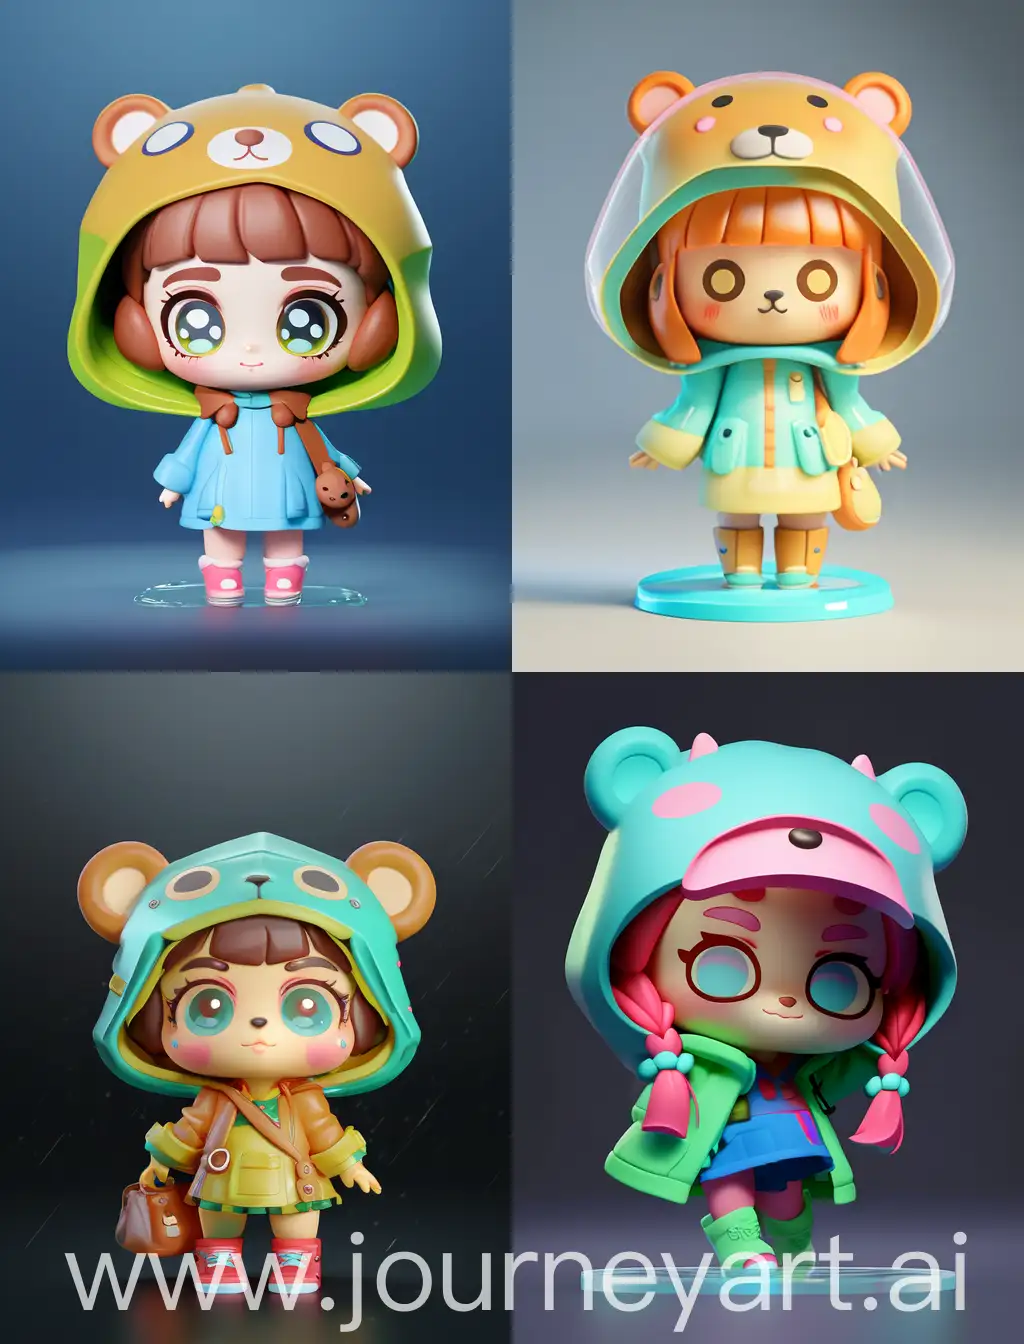 Blind Box Style girl fullbody, chibi, Super cute
girl, litle girl, smile, bear translucent raincoat,
blind box, bubble matt design exaggerated
pressure and movement, bright light,exaggerated
pressure and action, bright lights, clay materials,
precision mechanical parts, shut upintensity, 3d,
super detailed, C4D, Octane rating rendering, 
bear, mixer, 8K